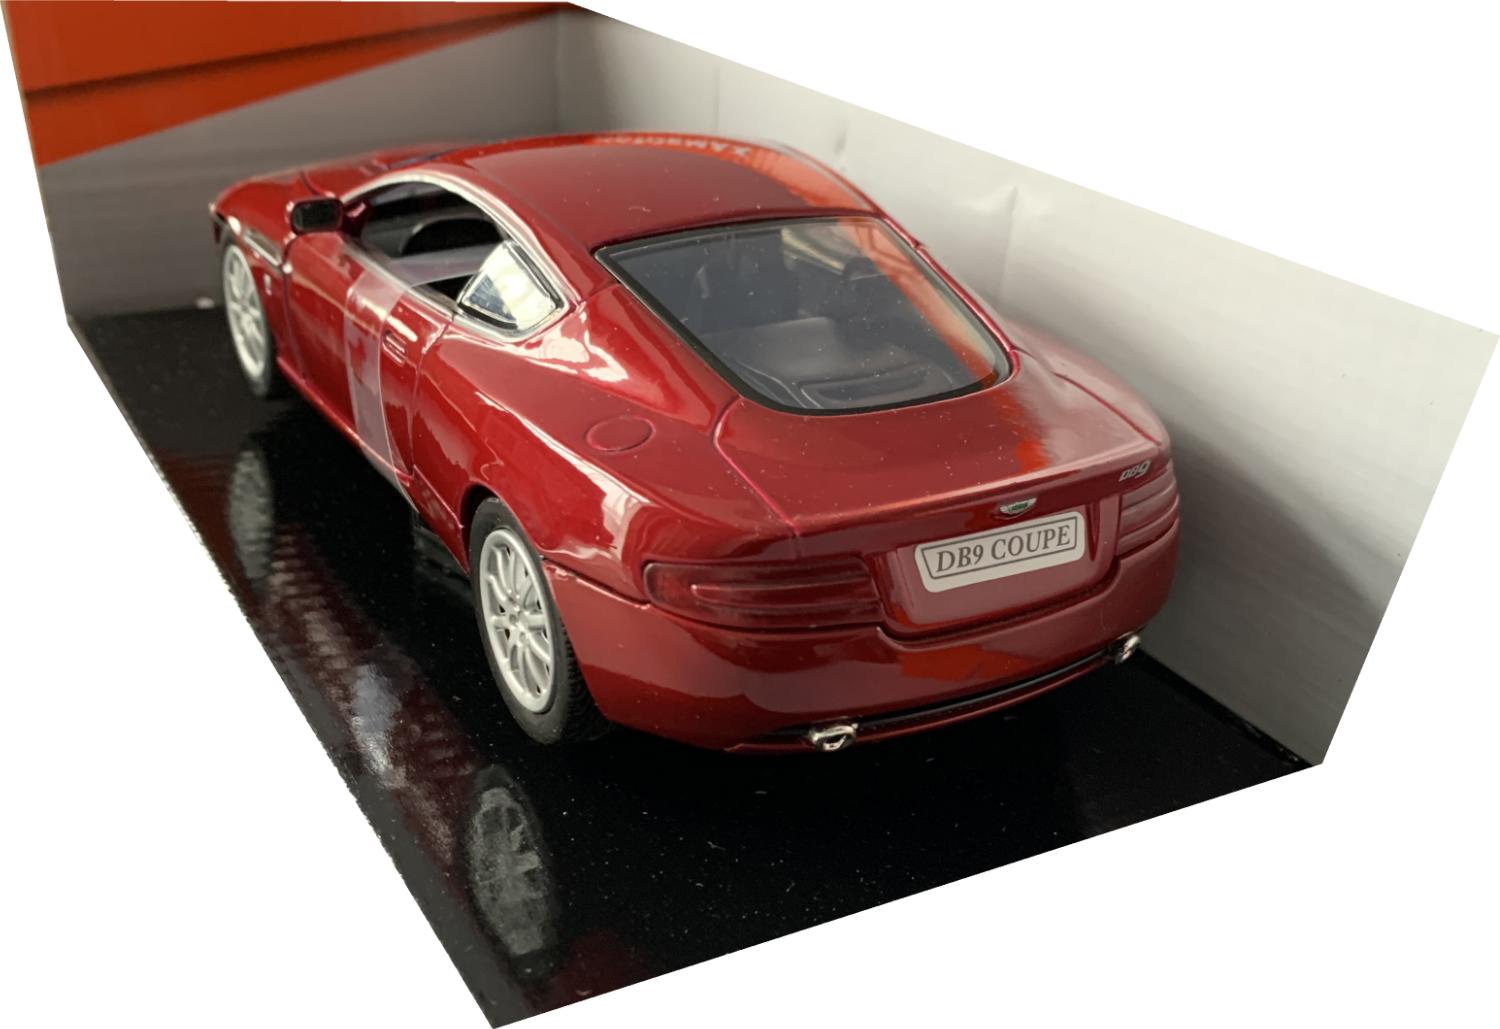 Aston Martin DB9 Coupe in magma red 1:24 scale model from Motormax